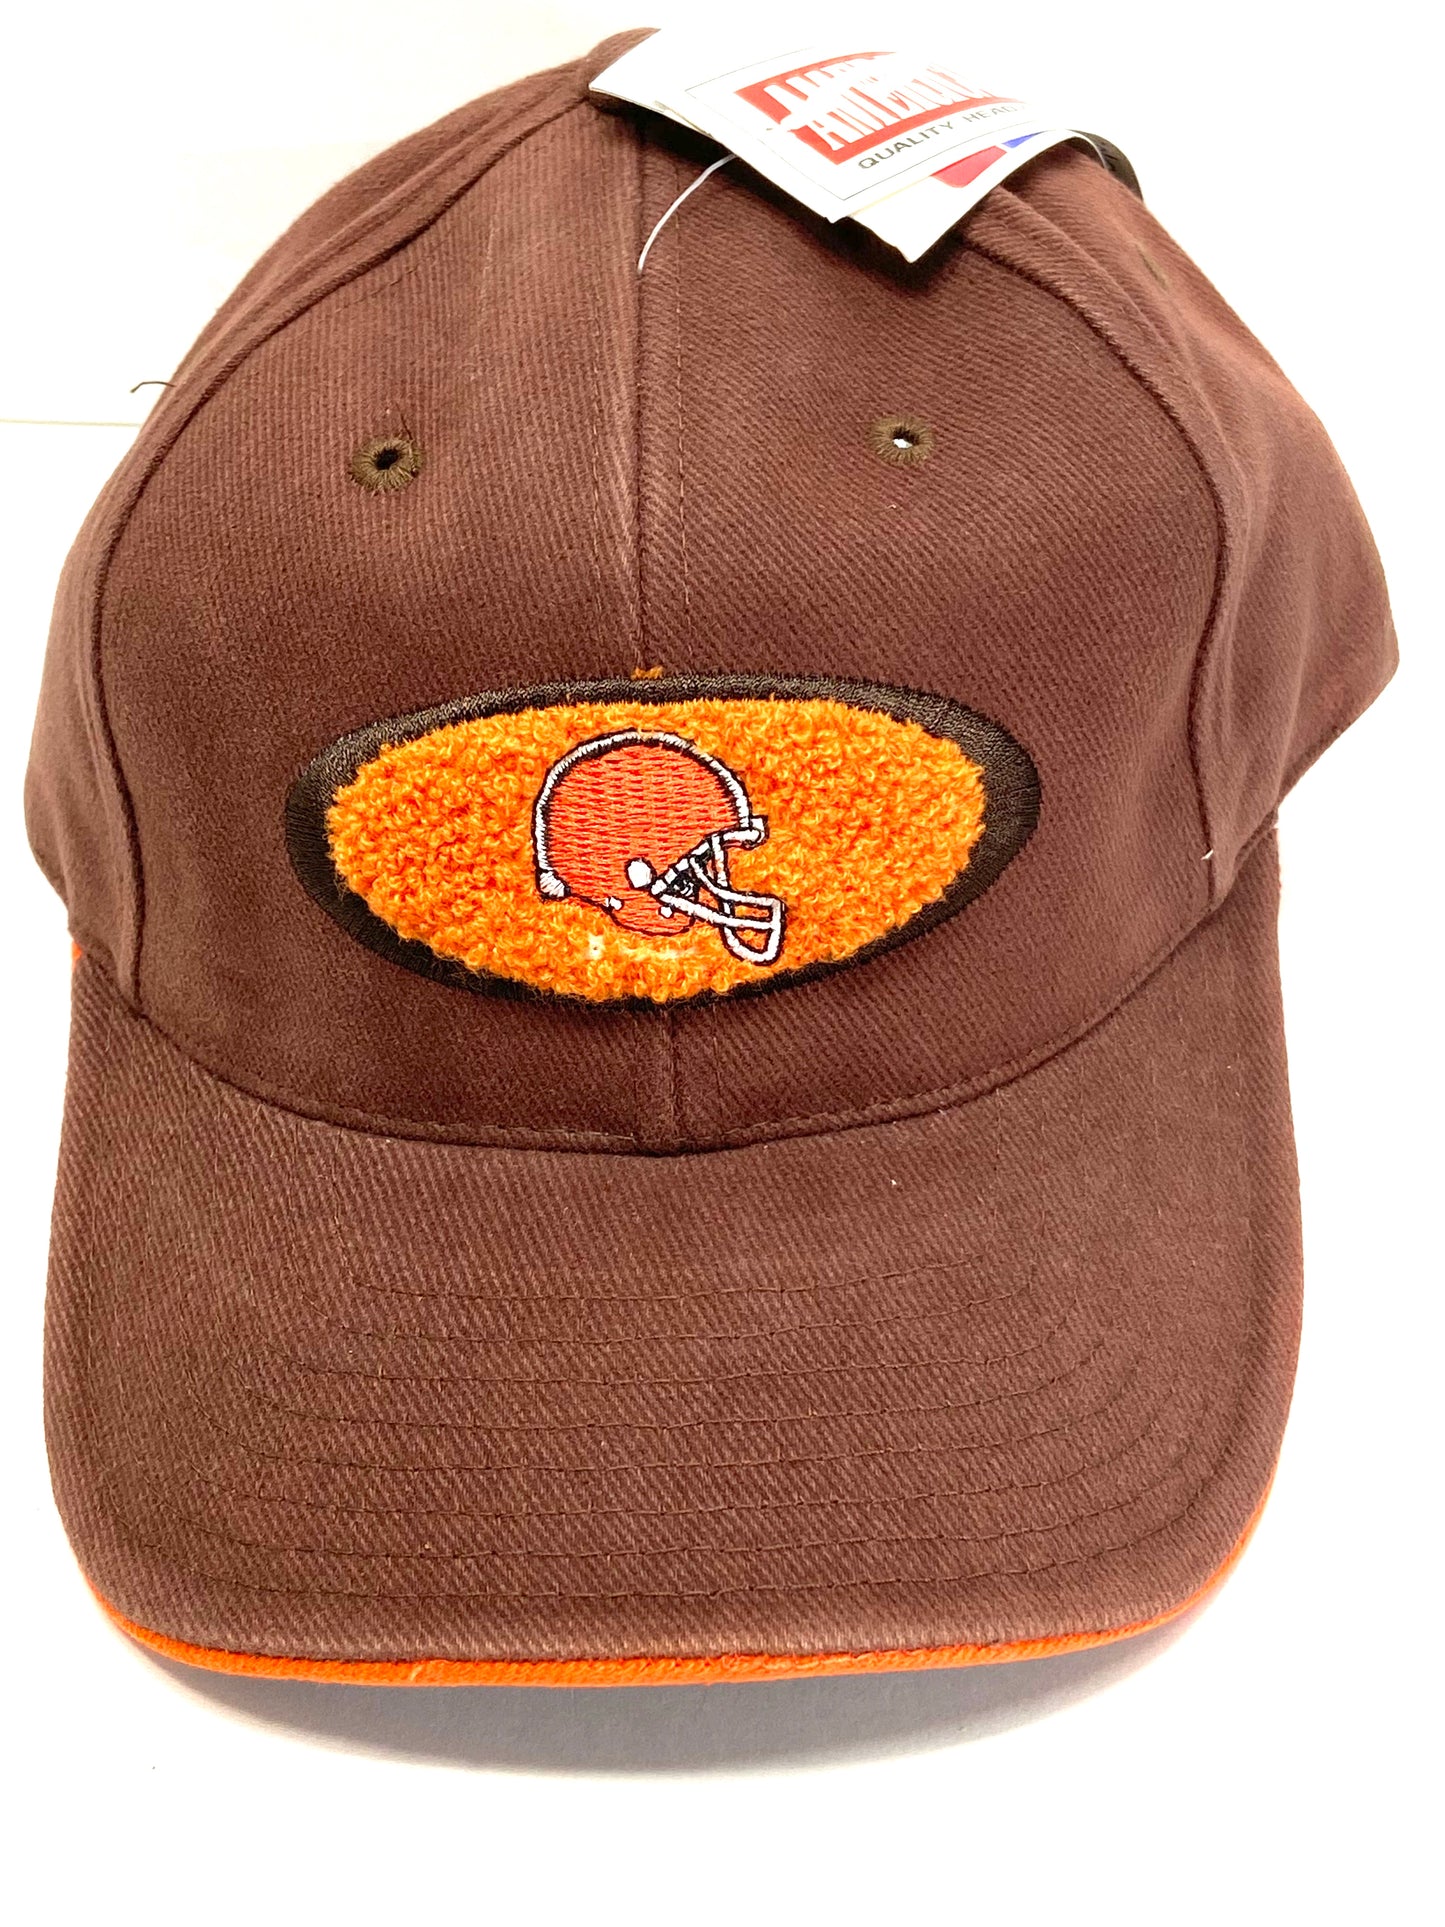 Cleveland Browns Vintage NFL "Shag" Logo Cap By American Needle